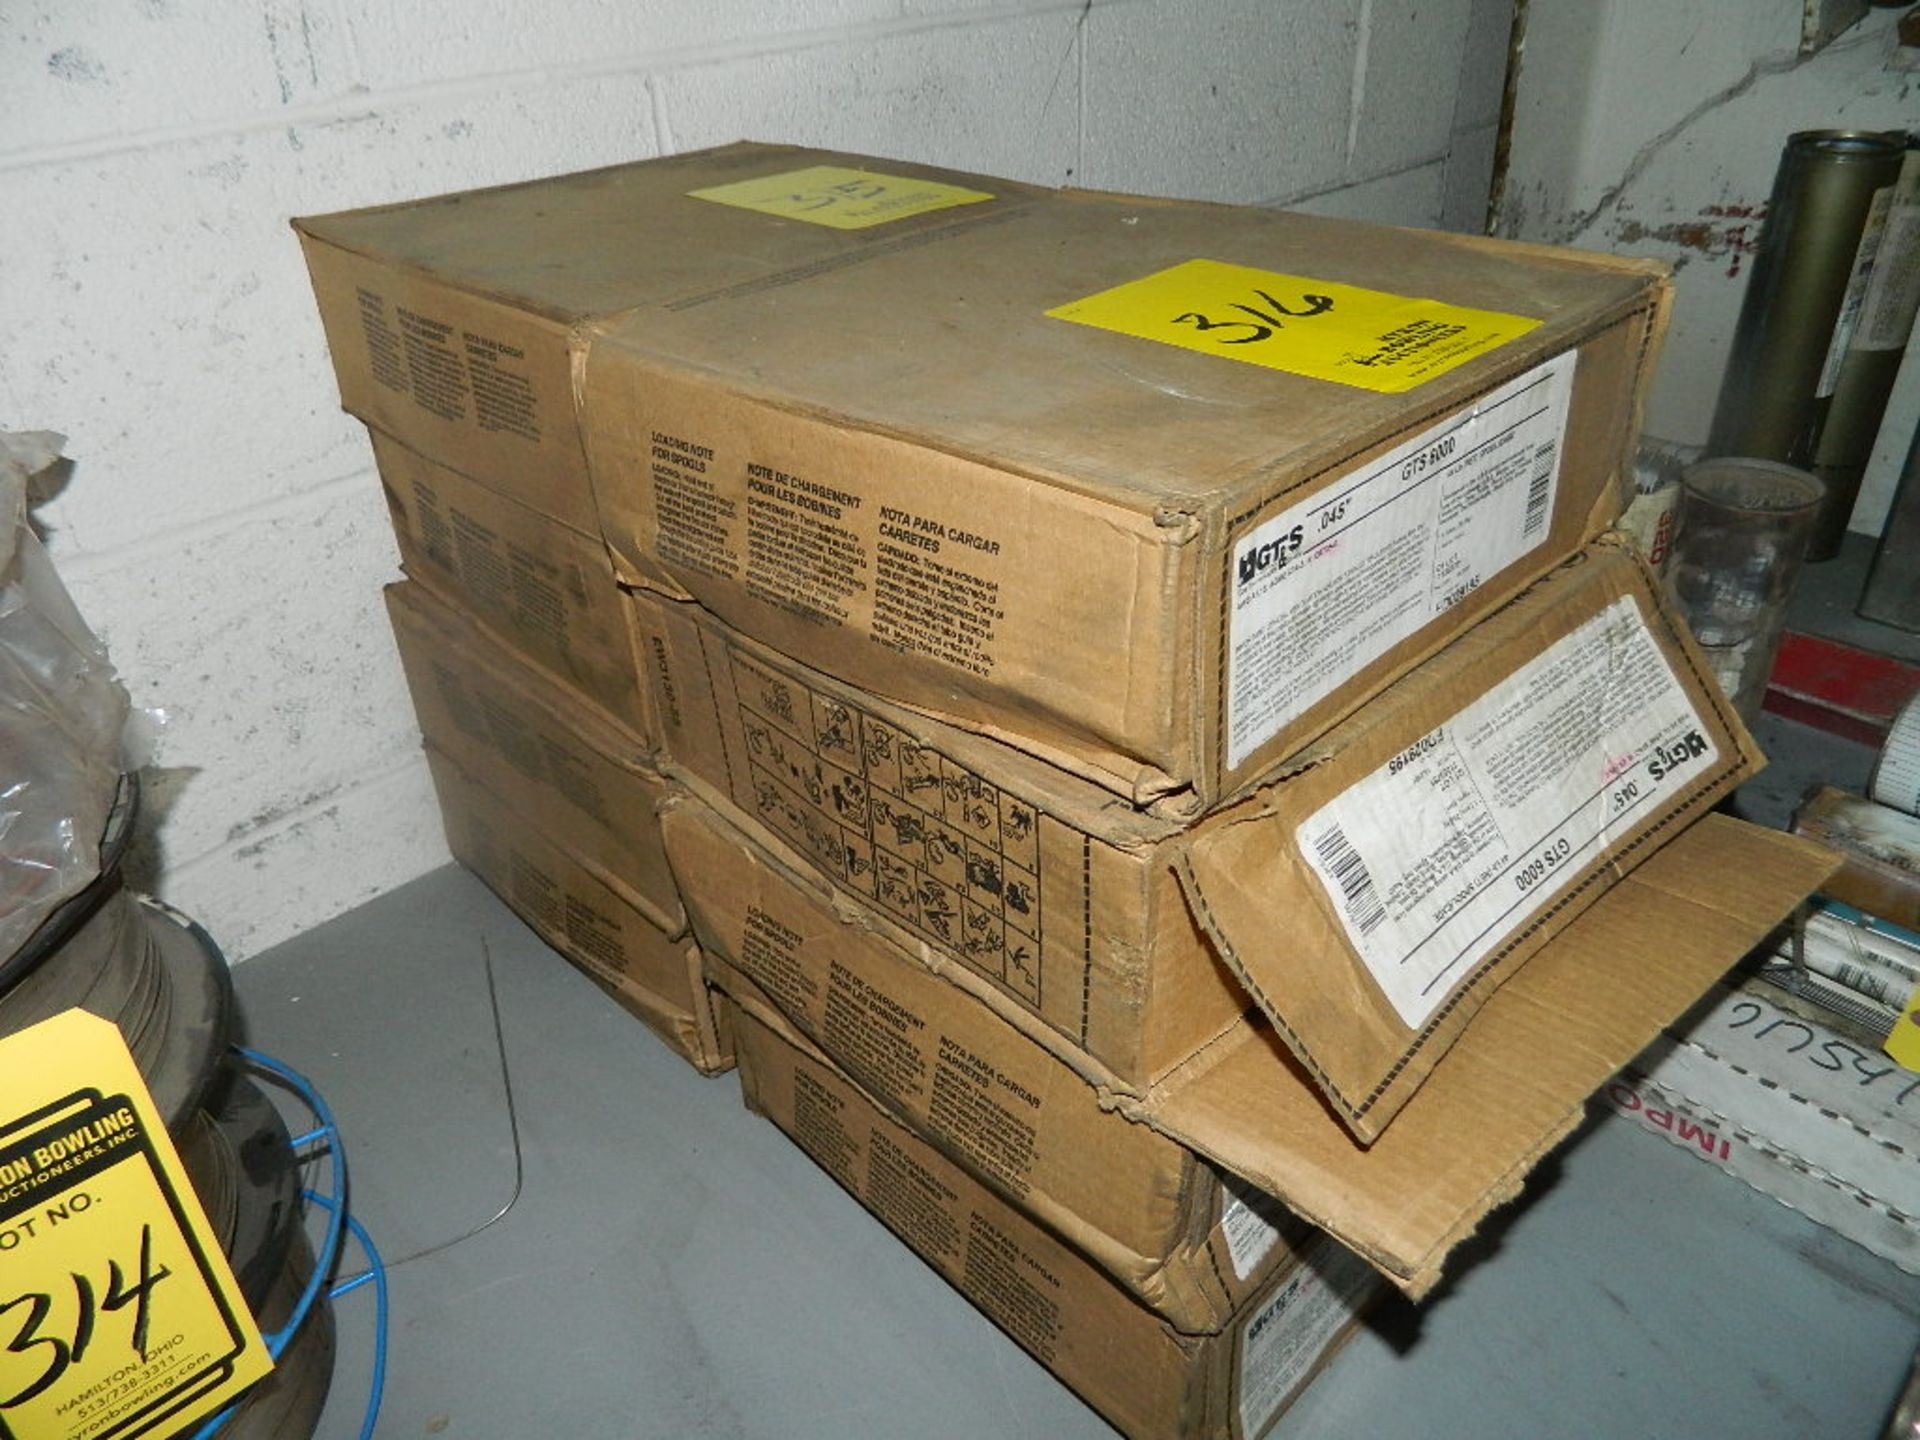 LOT OF WELDING WIRE (3 BOXES)